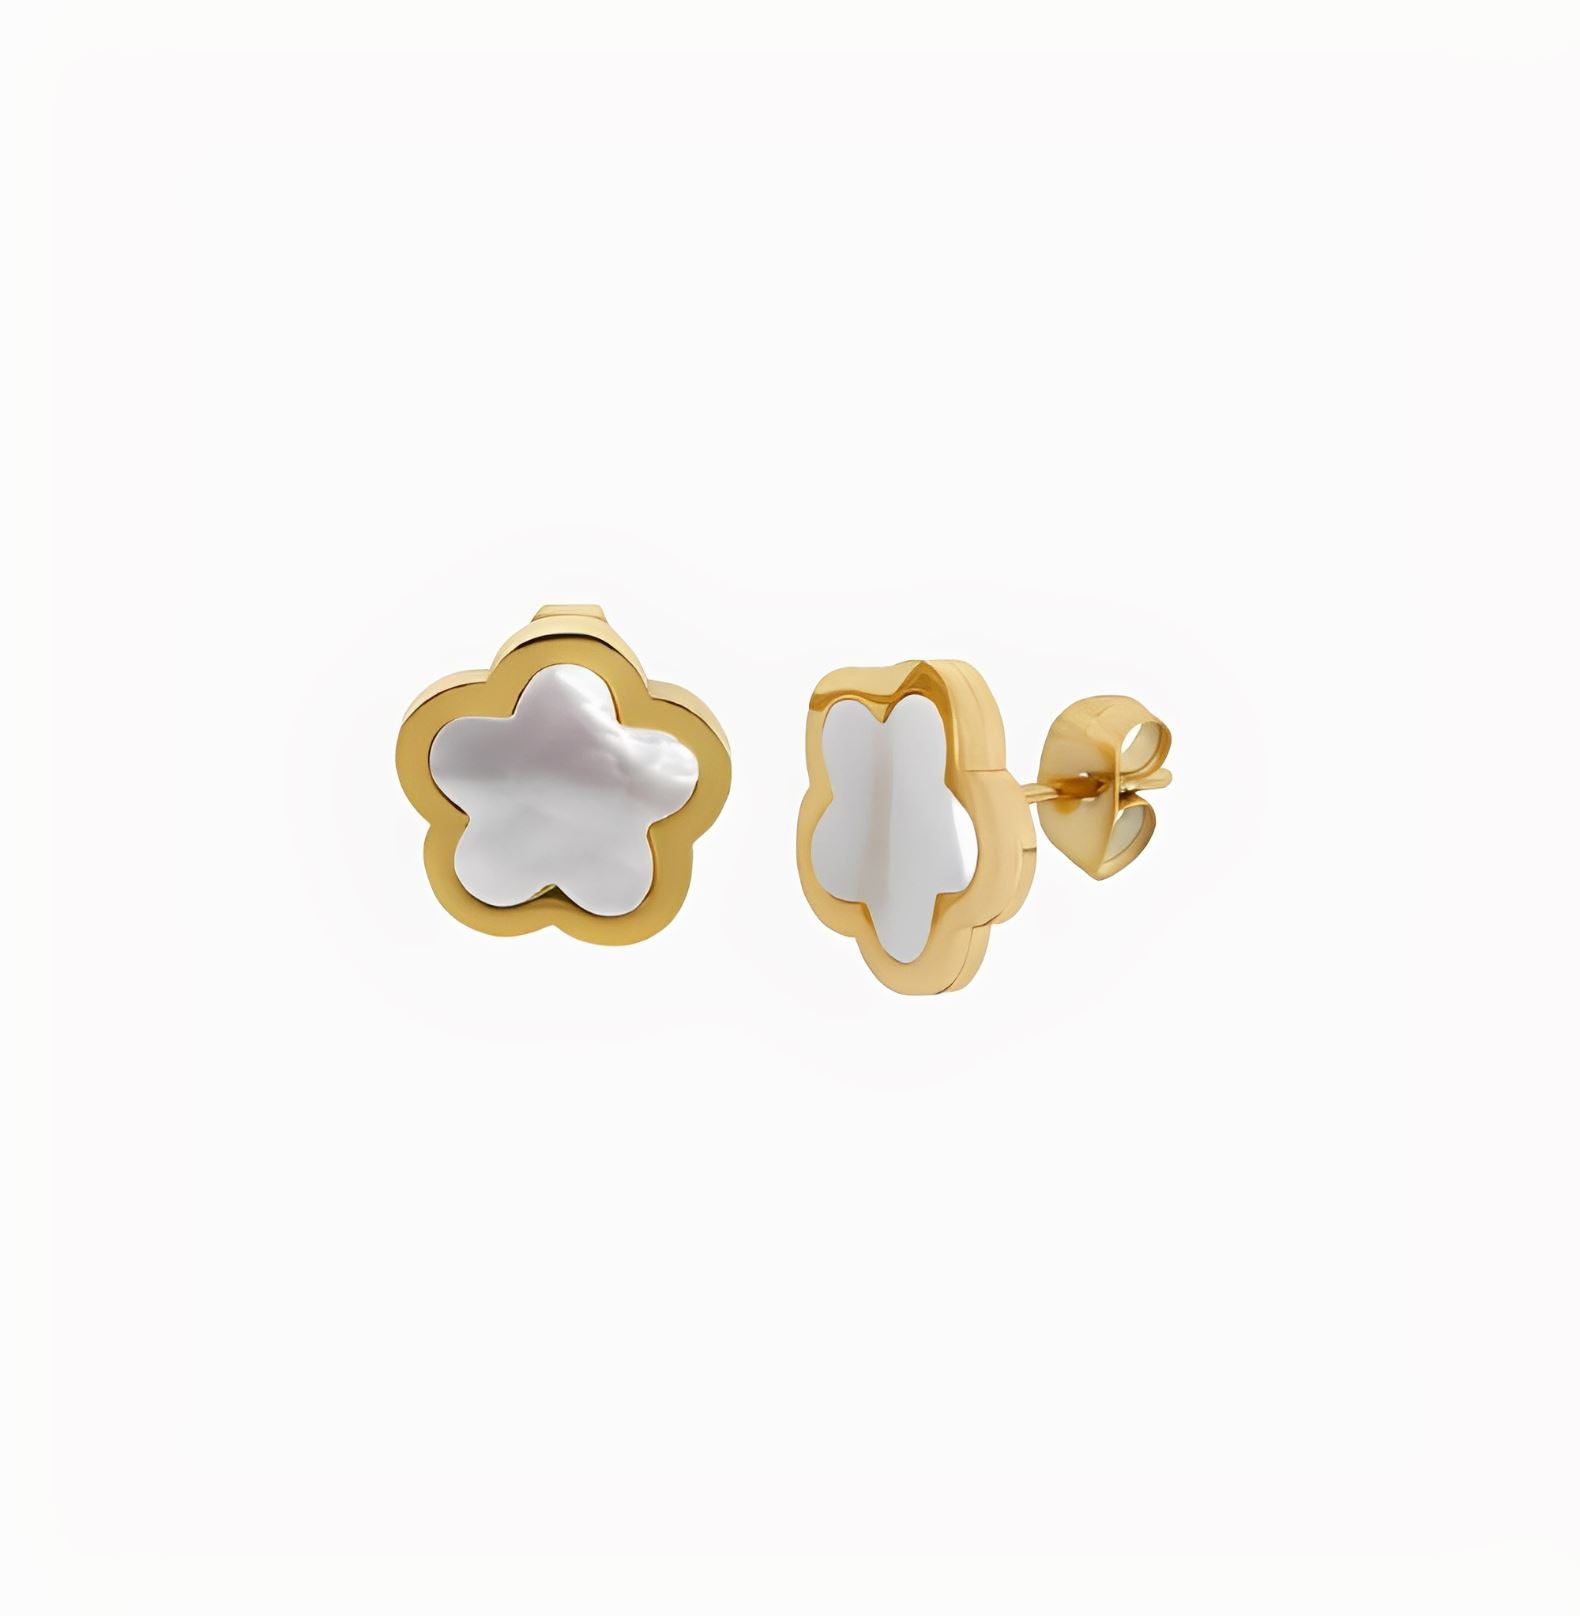 FLOWER STUD EARRINGS - Gold braclet Yubama Jewelry Online Store - The Elegant Designs of Gold and Silver ! 